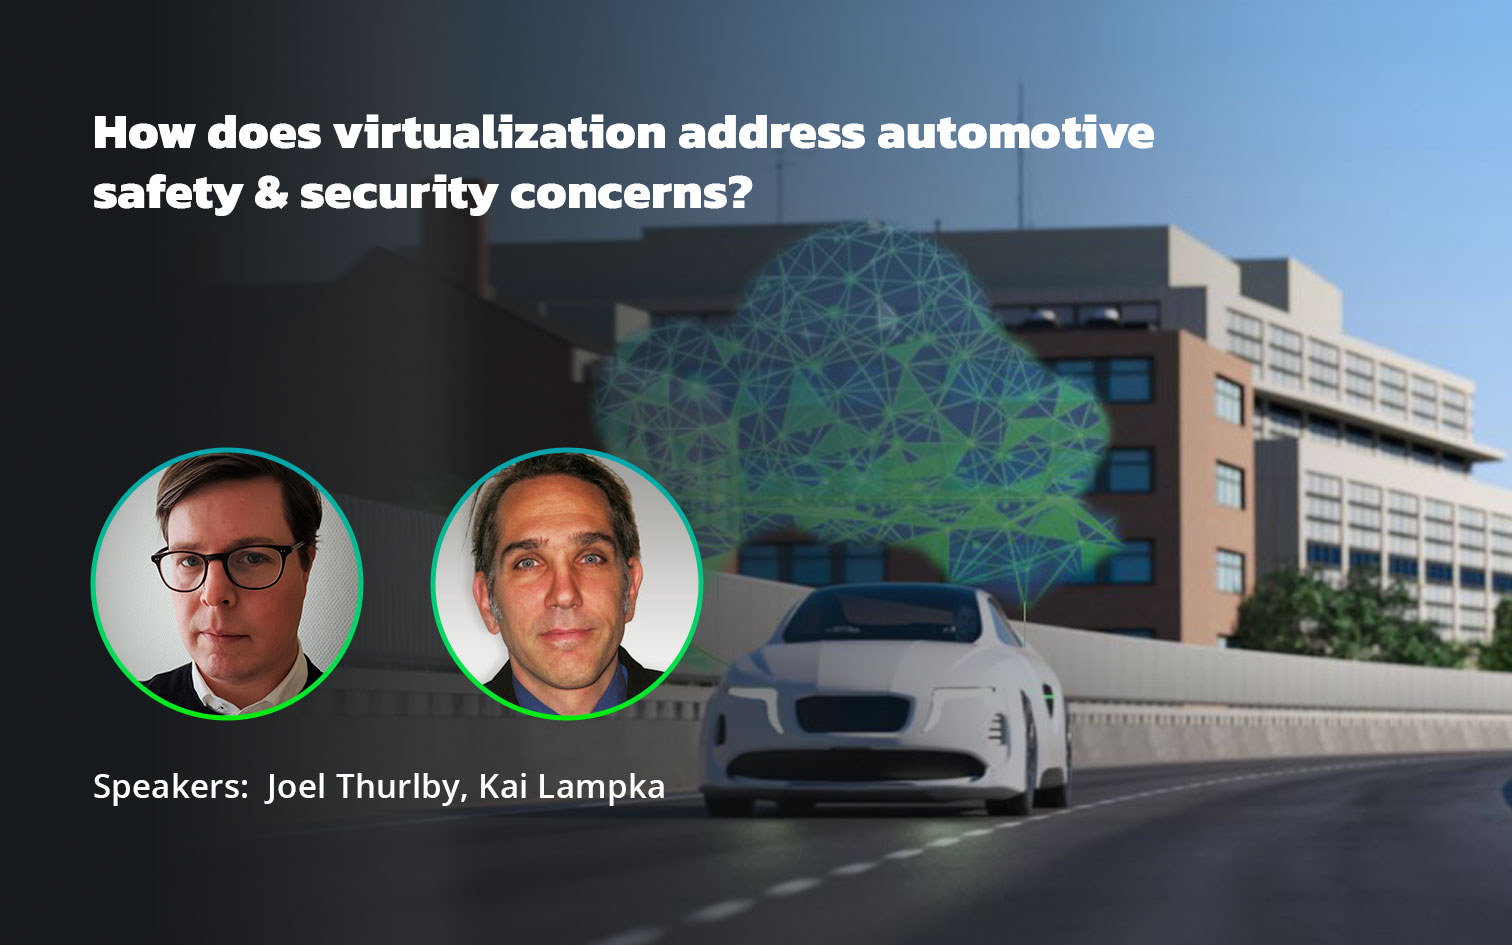 How does virtualization address automotive safety and security concerns